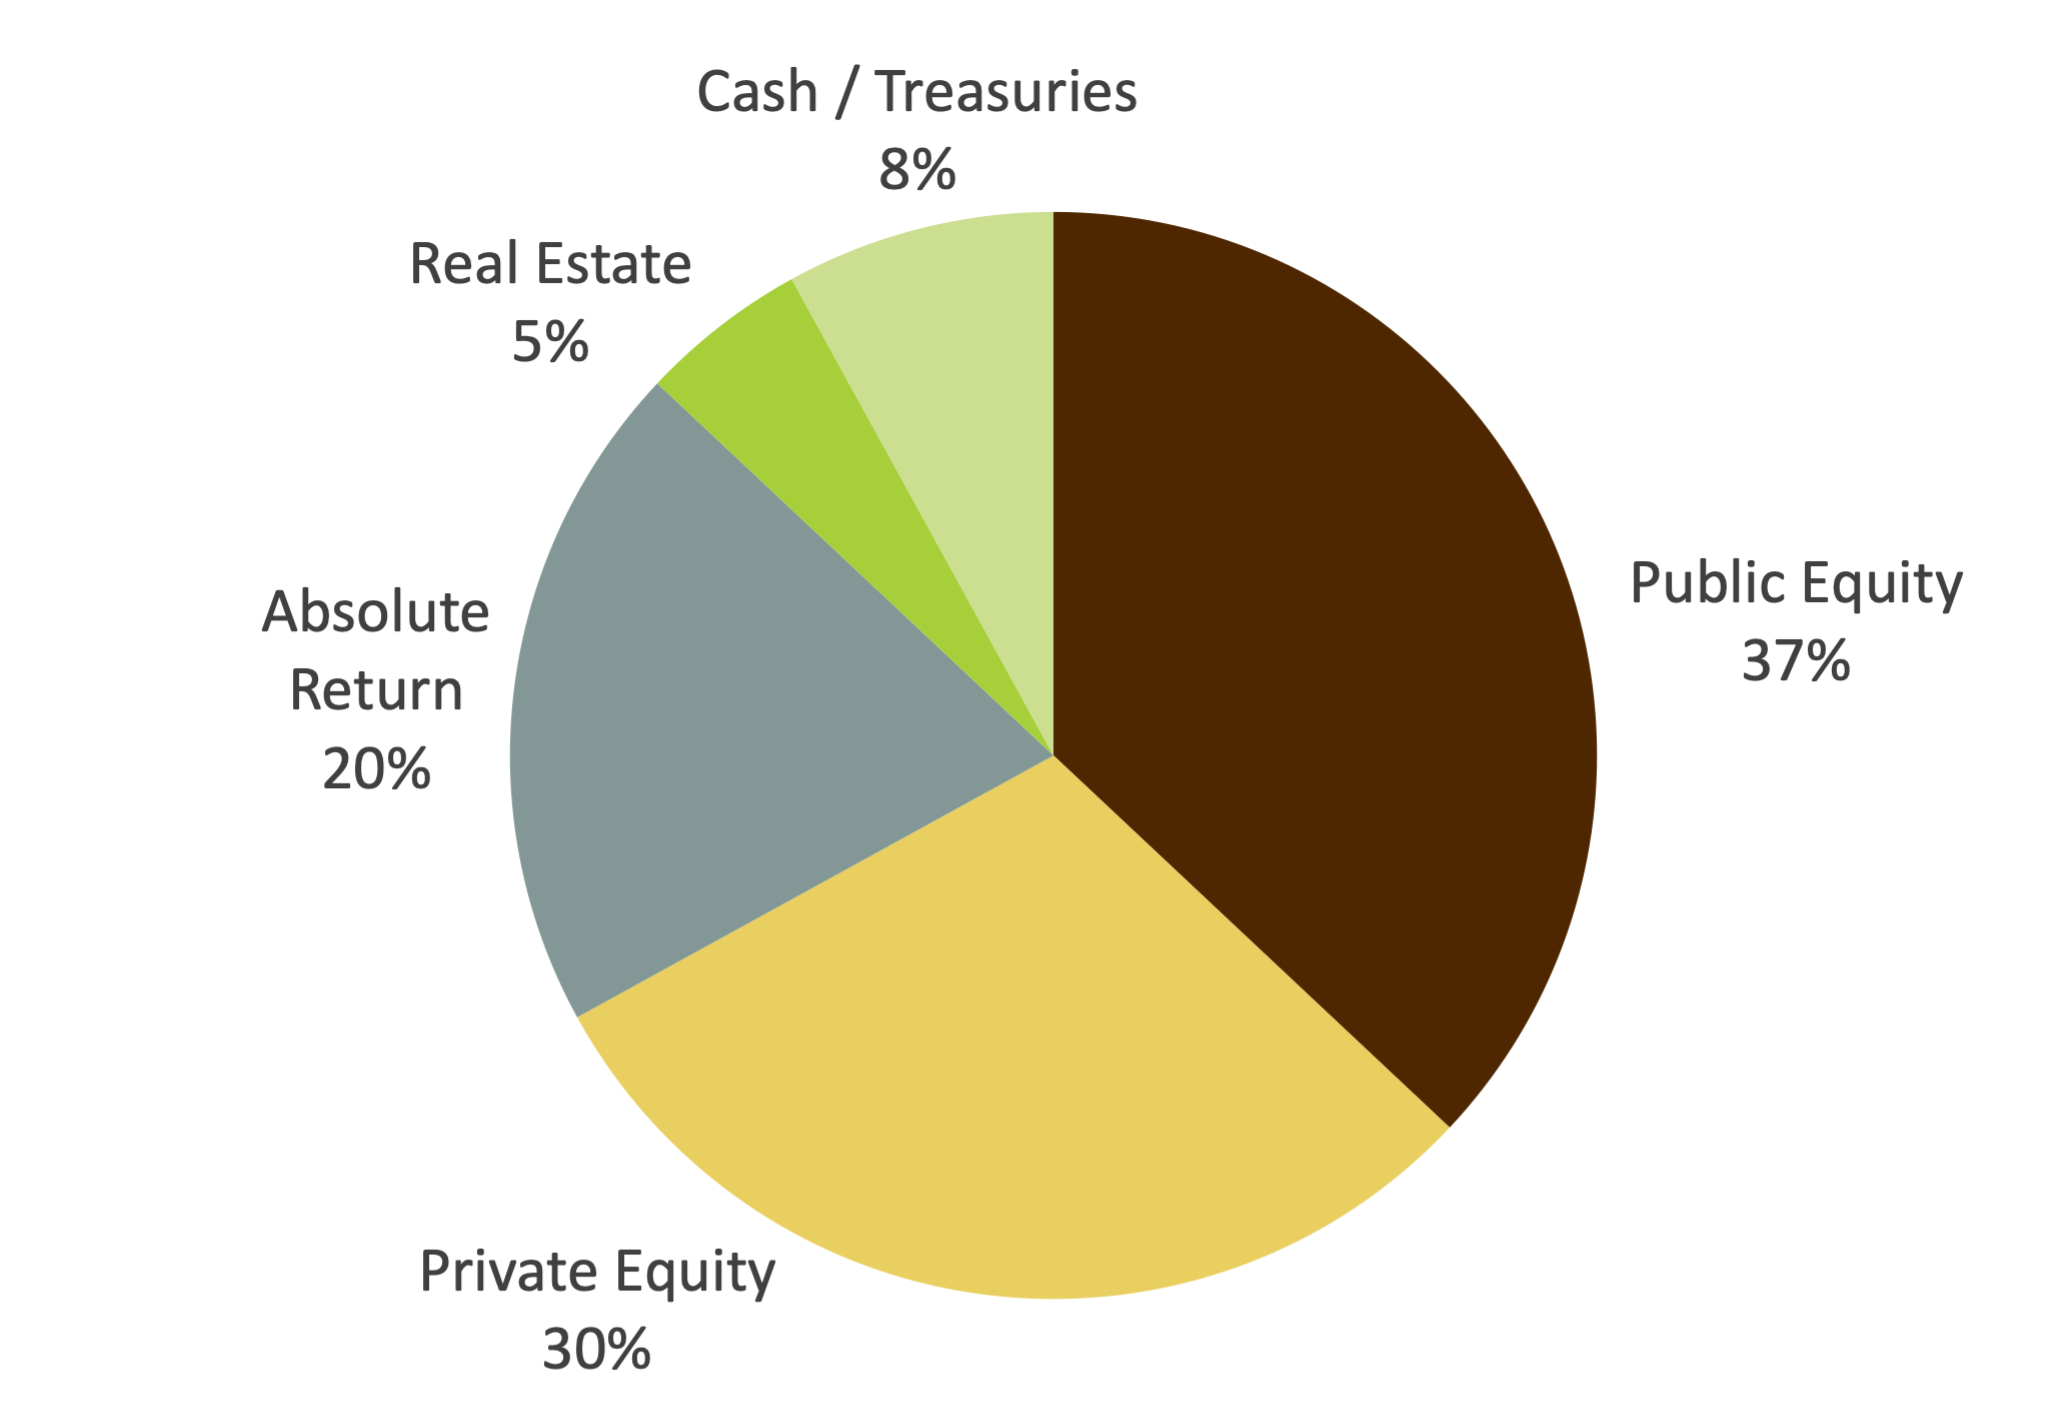 Asset Allocation Pie chart - Public Equity = 37%, Private Equity = 30%, Absolute Return = 20%, Treasuries/Cash = 8%, Real Estate = 5%